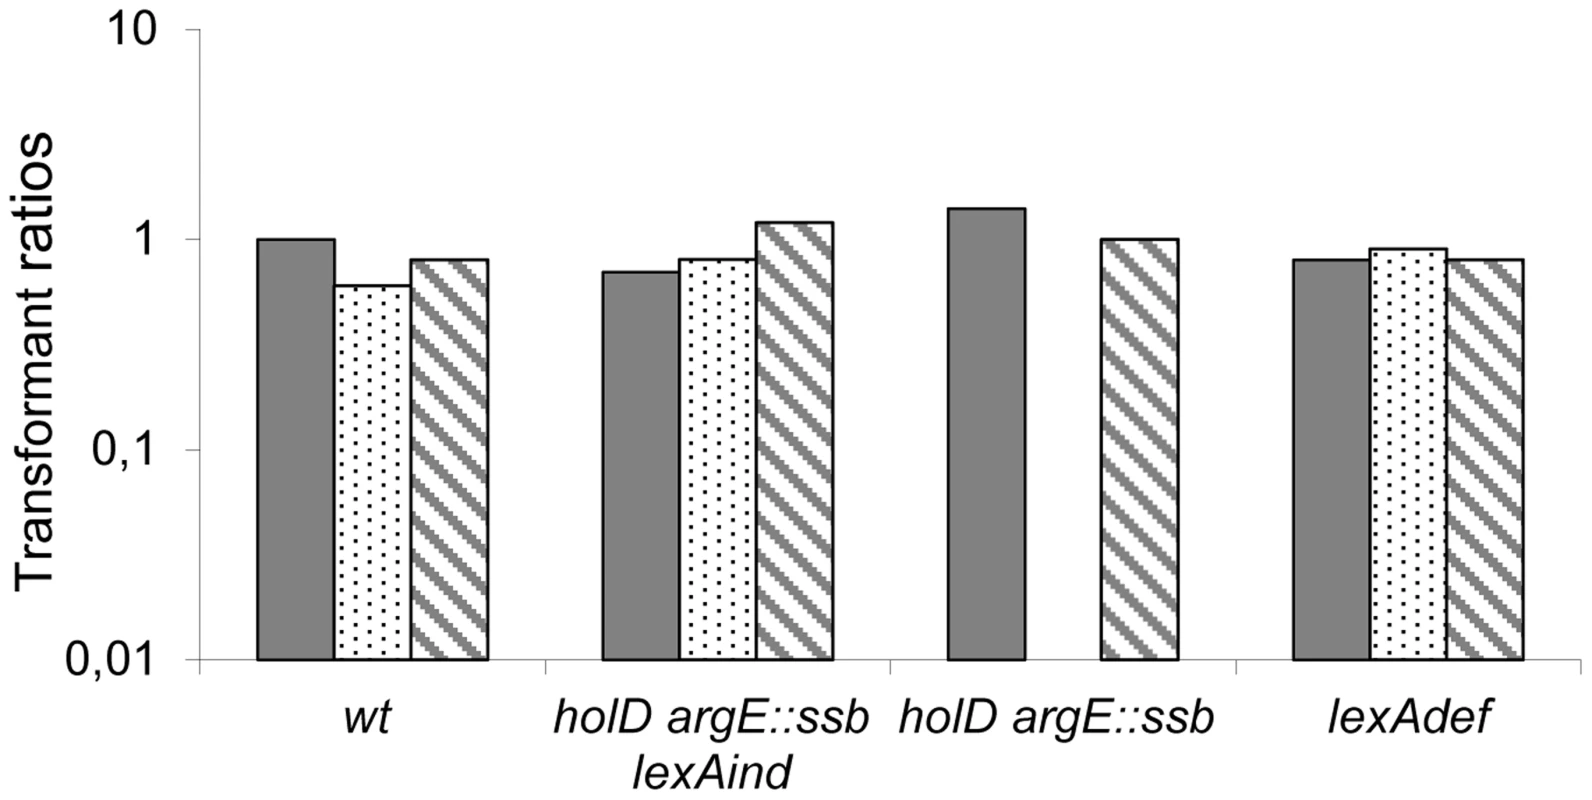 pGB-<i>dinB</i> is lethal to Δ<i>holD argE::ssb</i> only when the SOS response is induced.